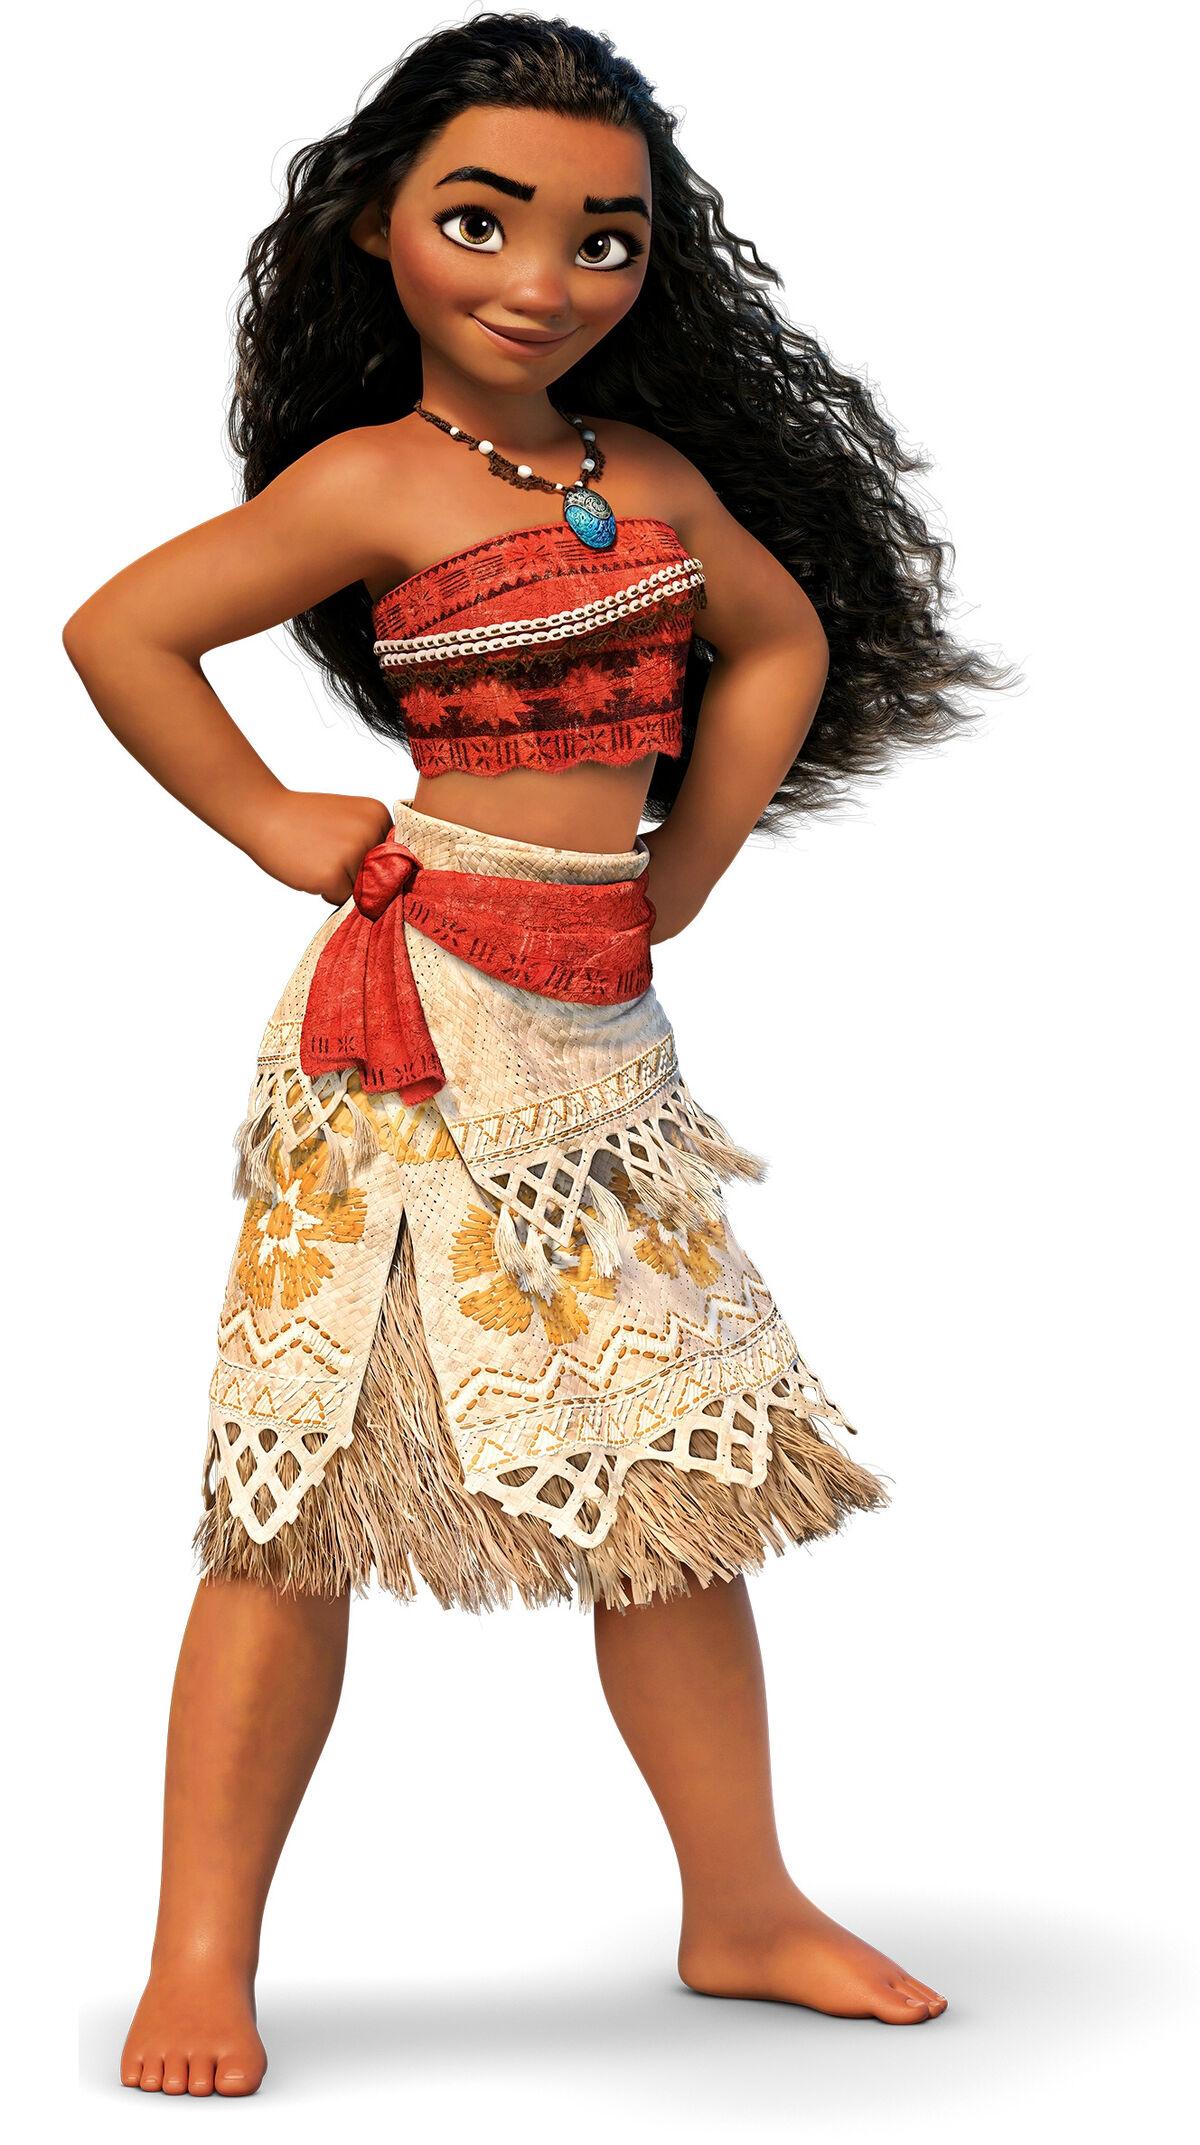 https://static.wikia.nocookie.net/fabulous-angelas/images/5/59/Disney_Moana_pose.jpg/revision/latest/scale-to-width-down/1200?cb=20201114041819